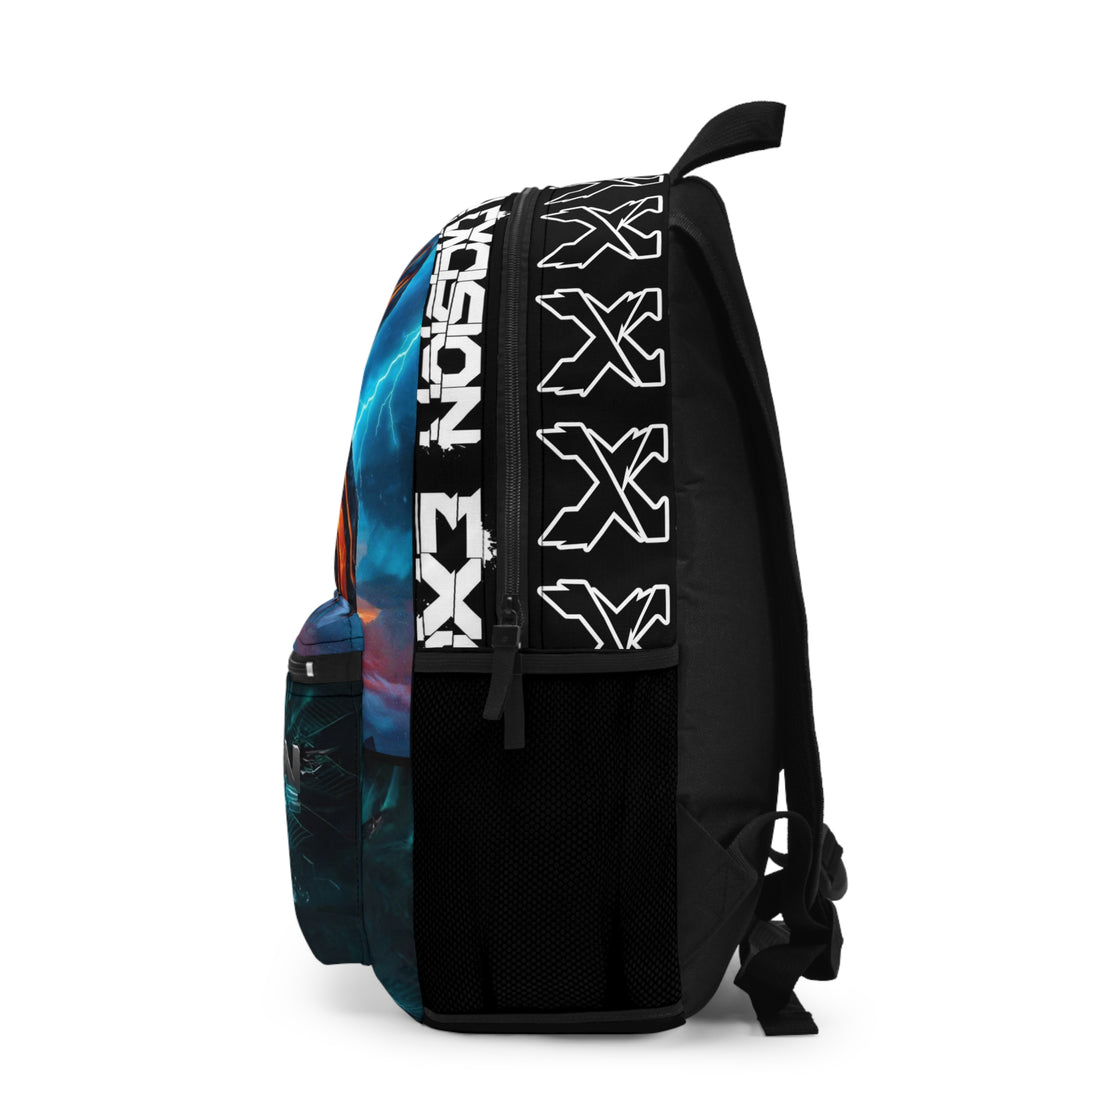 Excision Festival Backpack